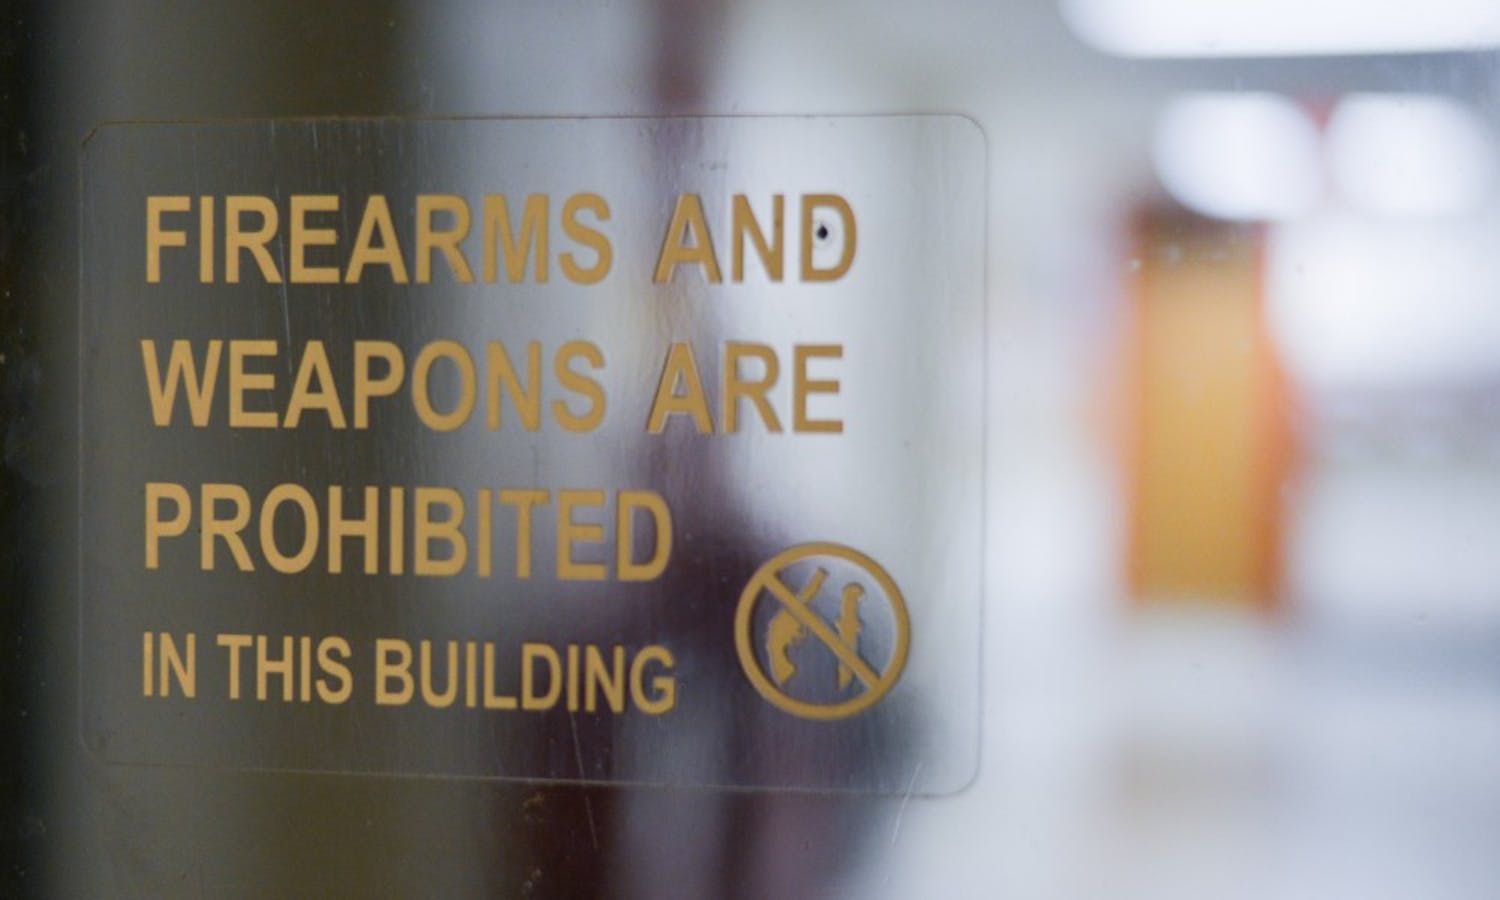 Concealed carry is currently prohibited in university buildings.